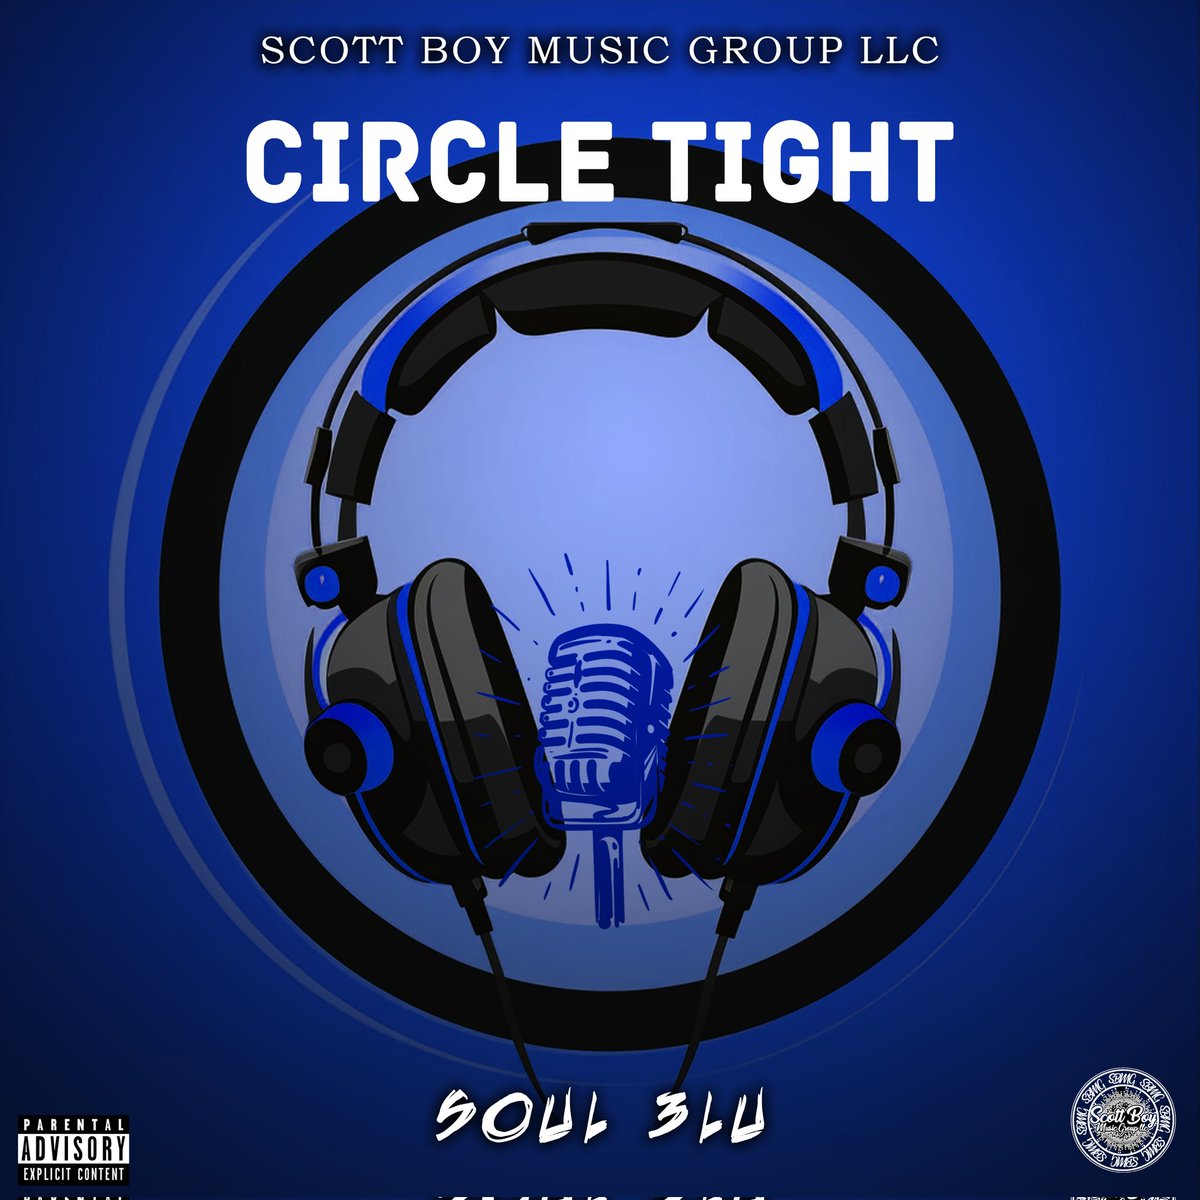 NEW SINGLE 'CIRCLE TIGHT' BY @Soul3lu2 WILL BE AVAILABLE ON ALL STREAMING PLATFORMS 12/08/23 @symphonicdist 
#sbmg #newsinglealert #music